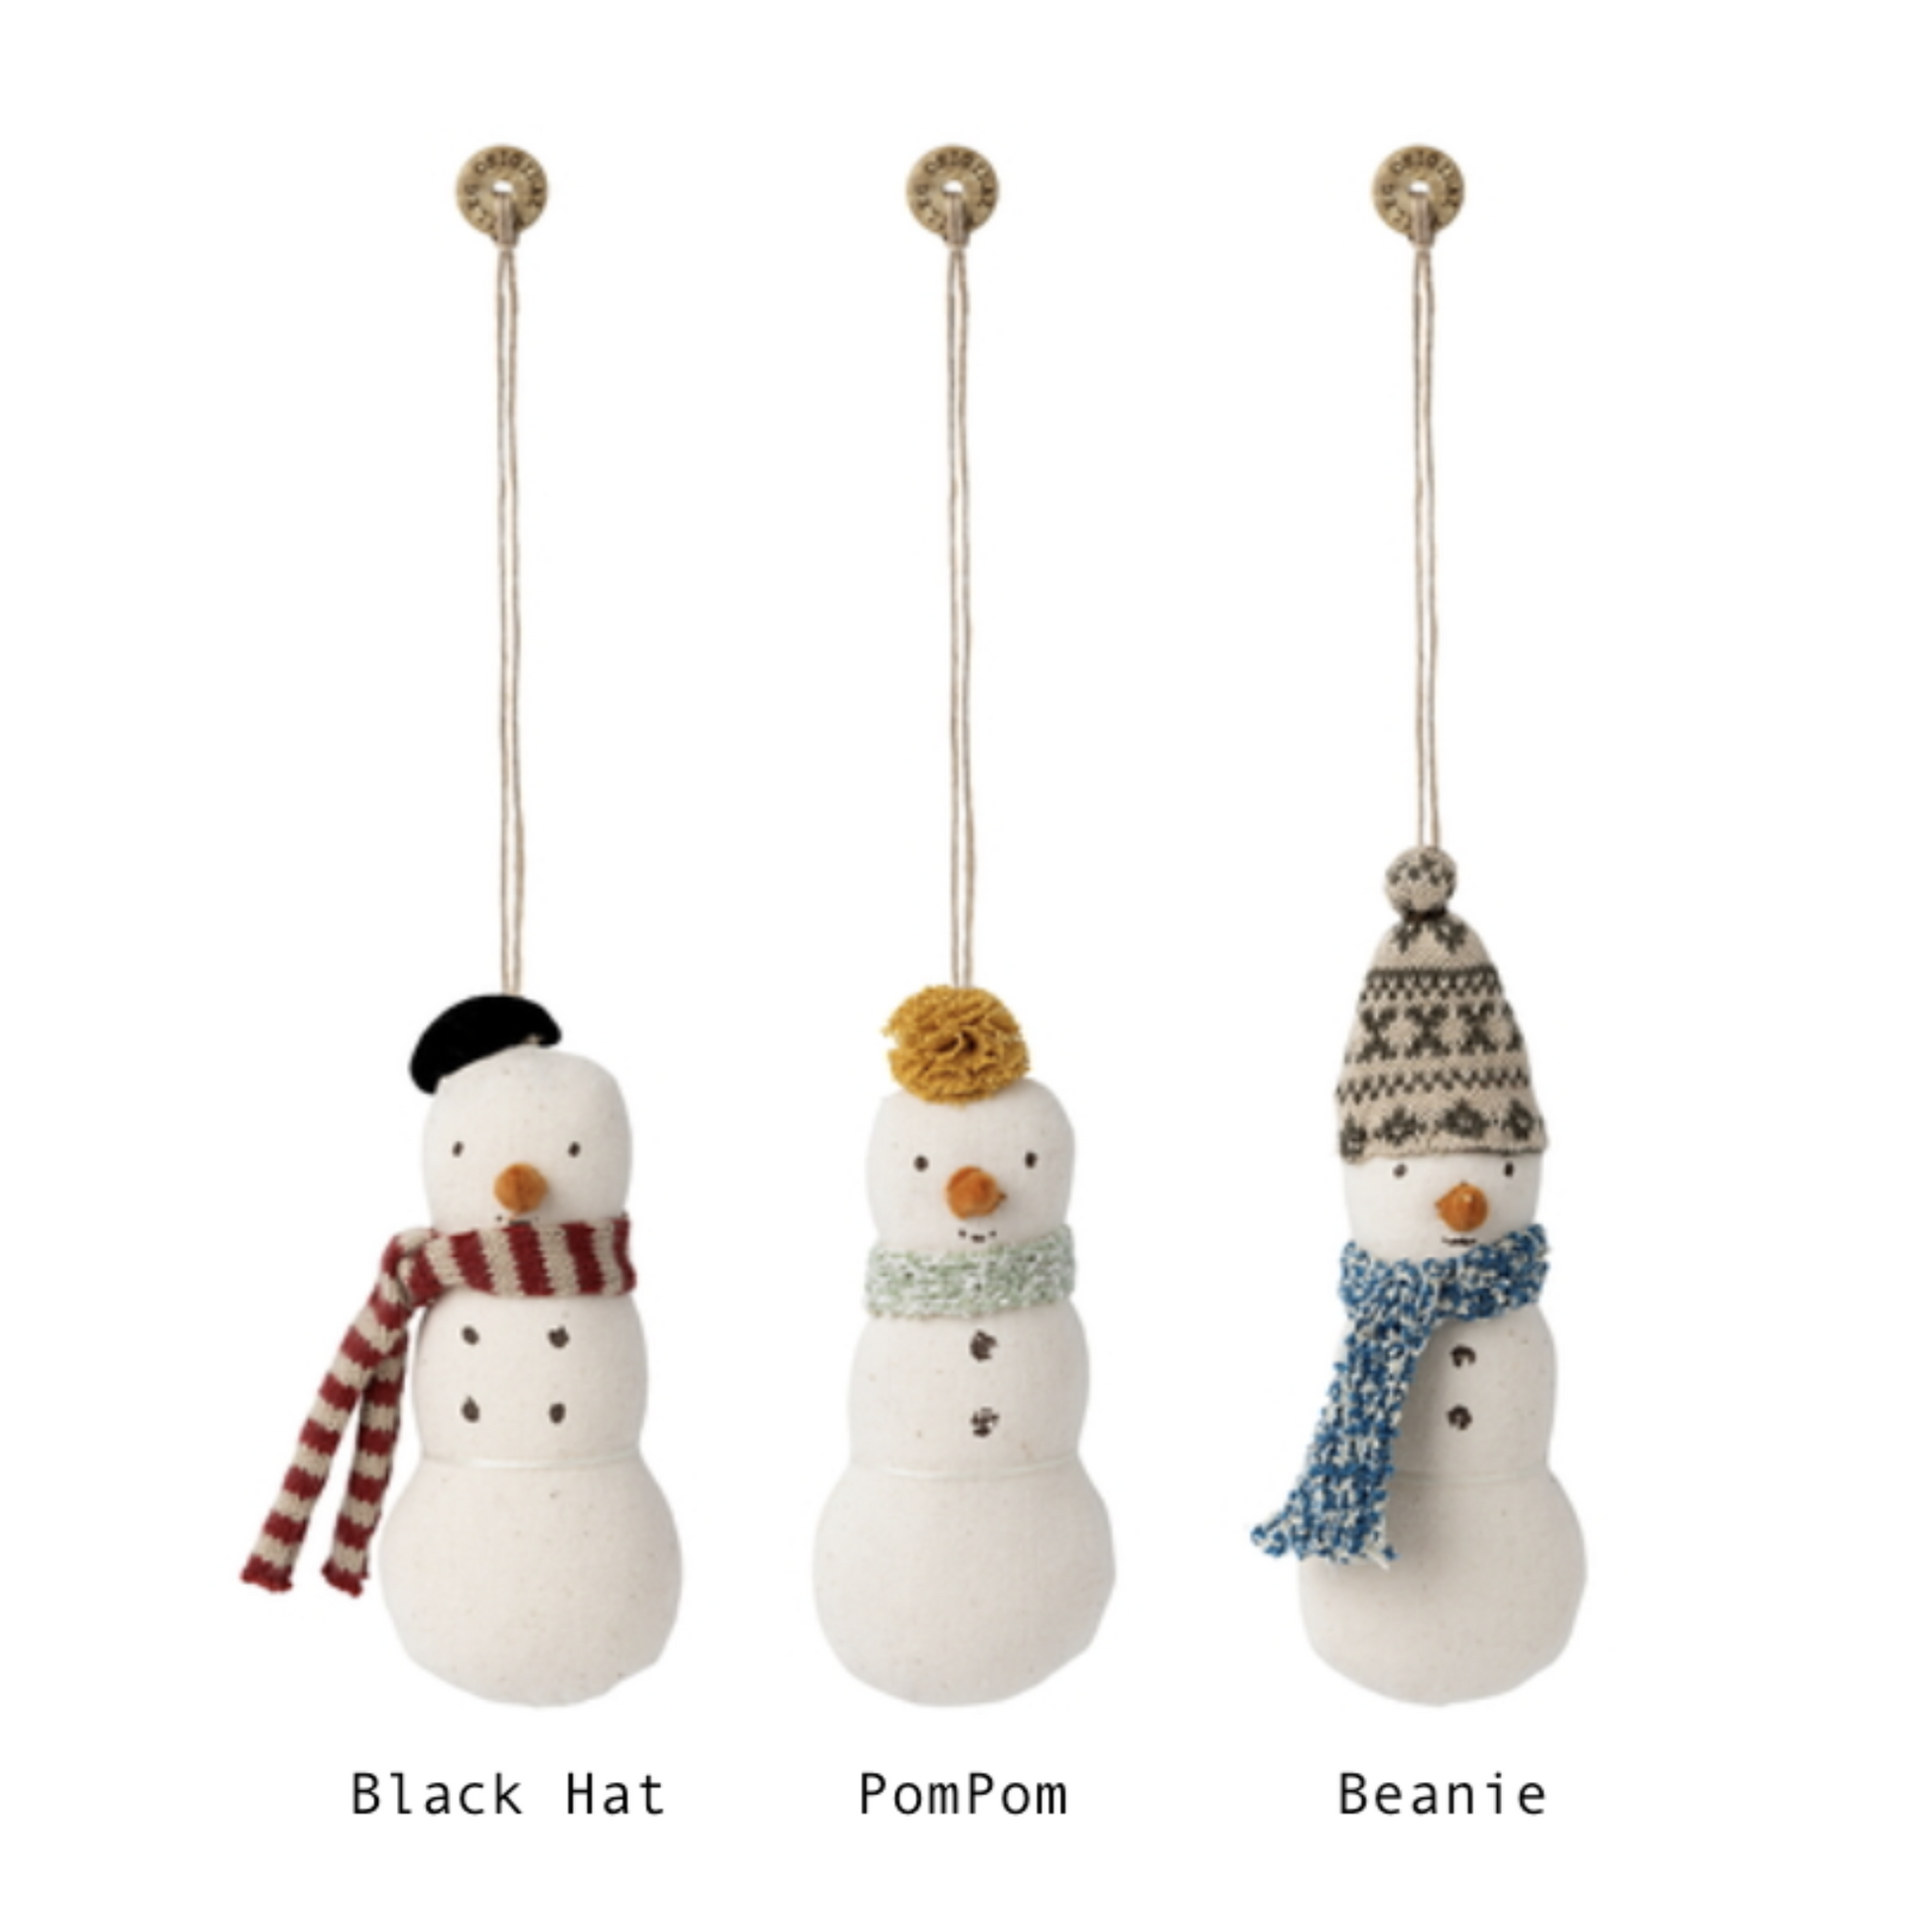 How To Make Hats For Cute Snowman Ornaments - My Humble Home and Garden